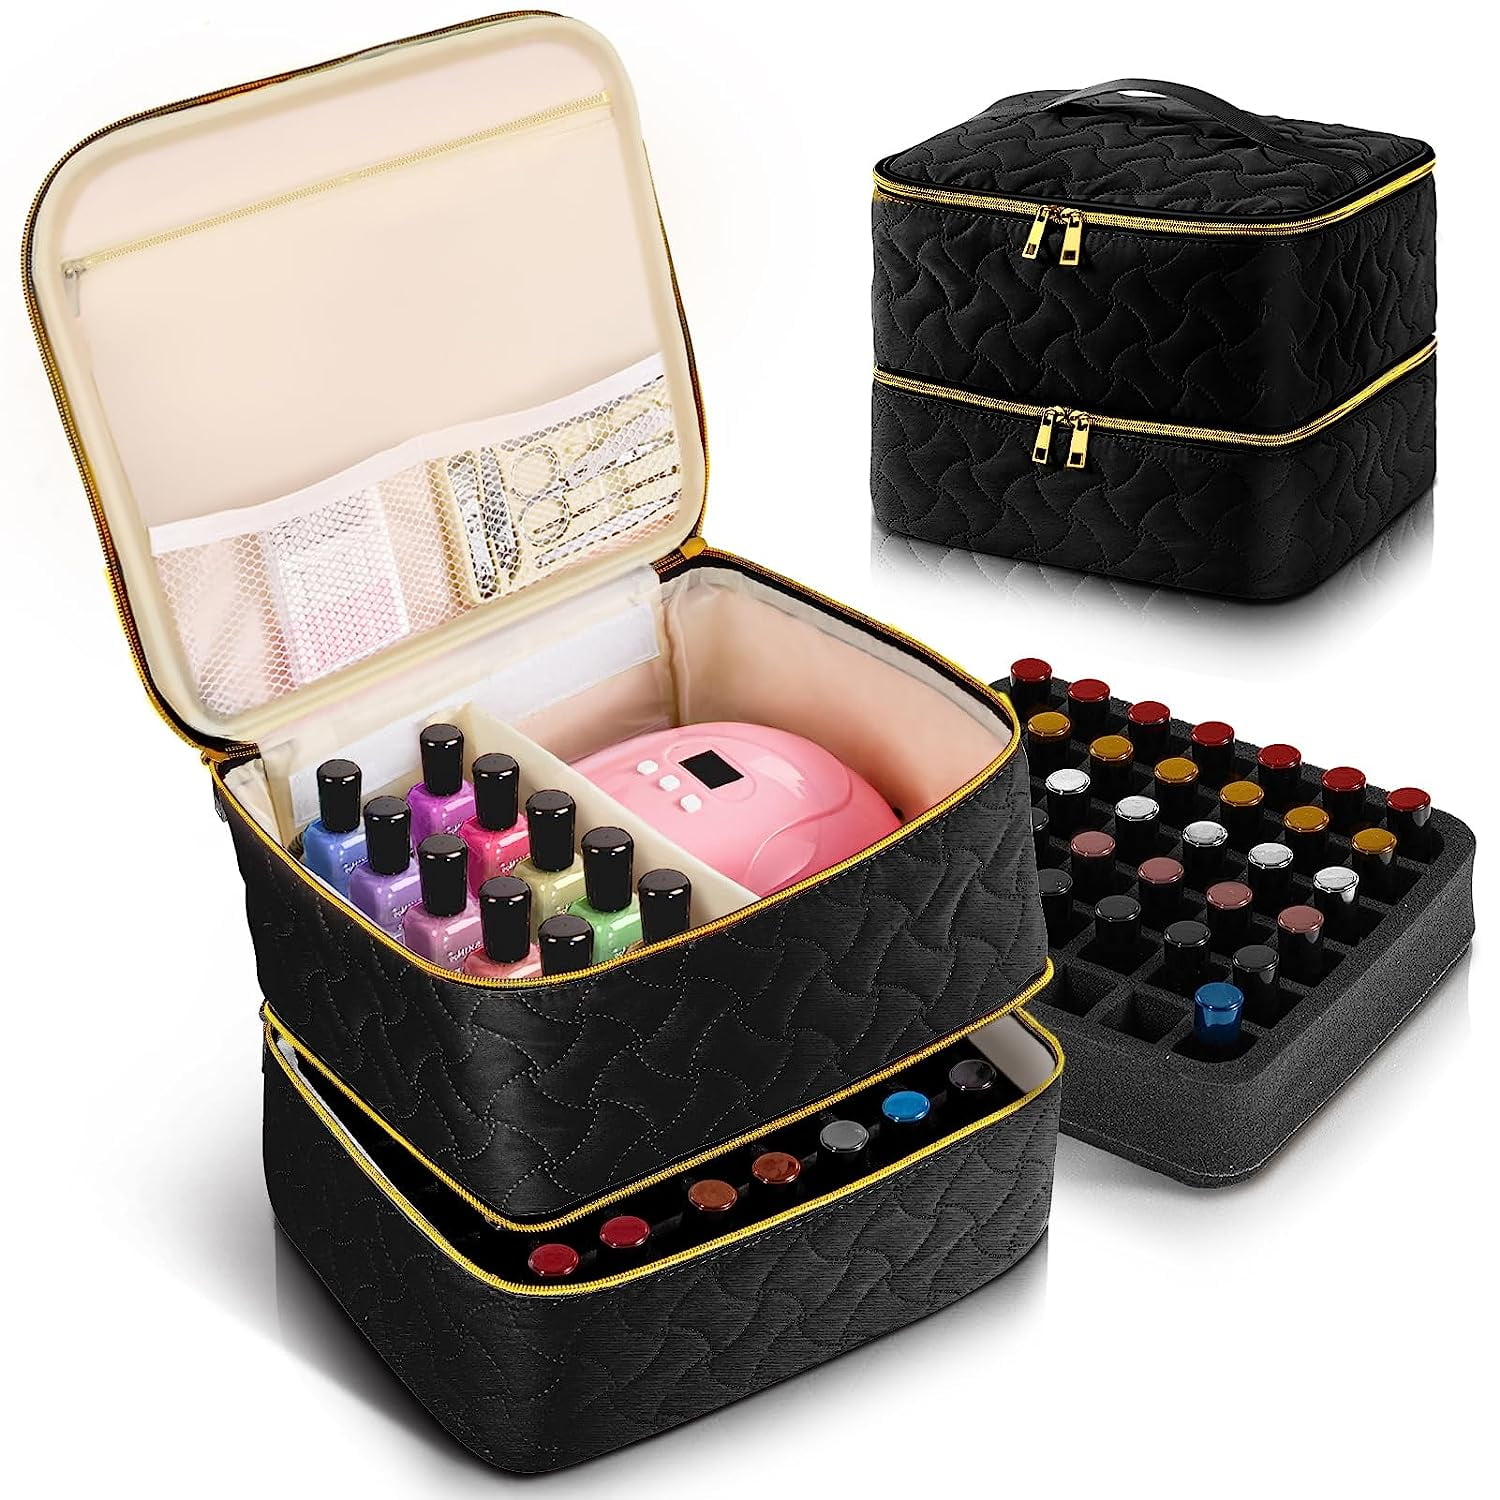  Covkev Nail Polish Organizer Holds Nail Lamp and 40 Bottles  [15ml/0.5 fl.oz], Double-Layer Nail Bag Organizer Case, Nail Polish Carrying  Case with Manicure Tools Storage—Black : Beauty & Personal Care